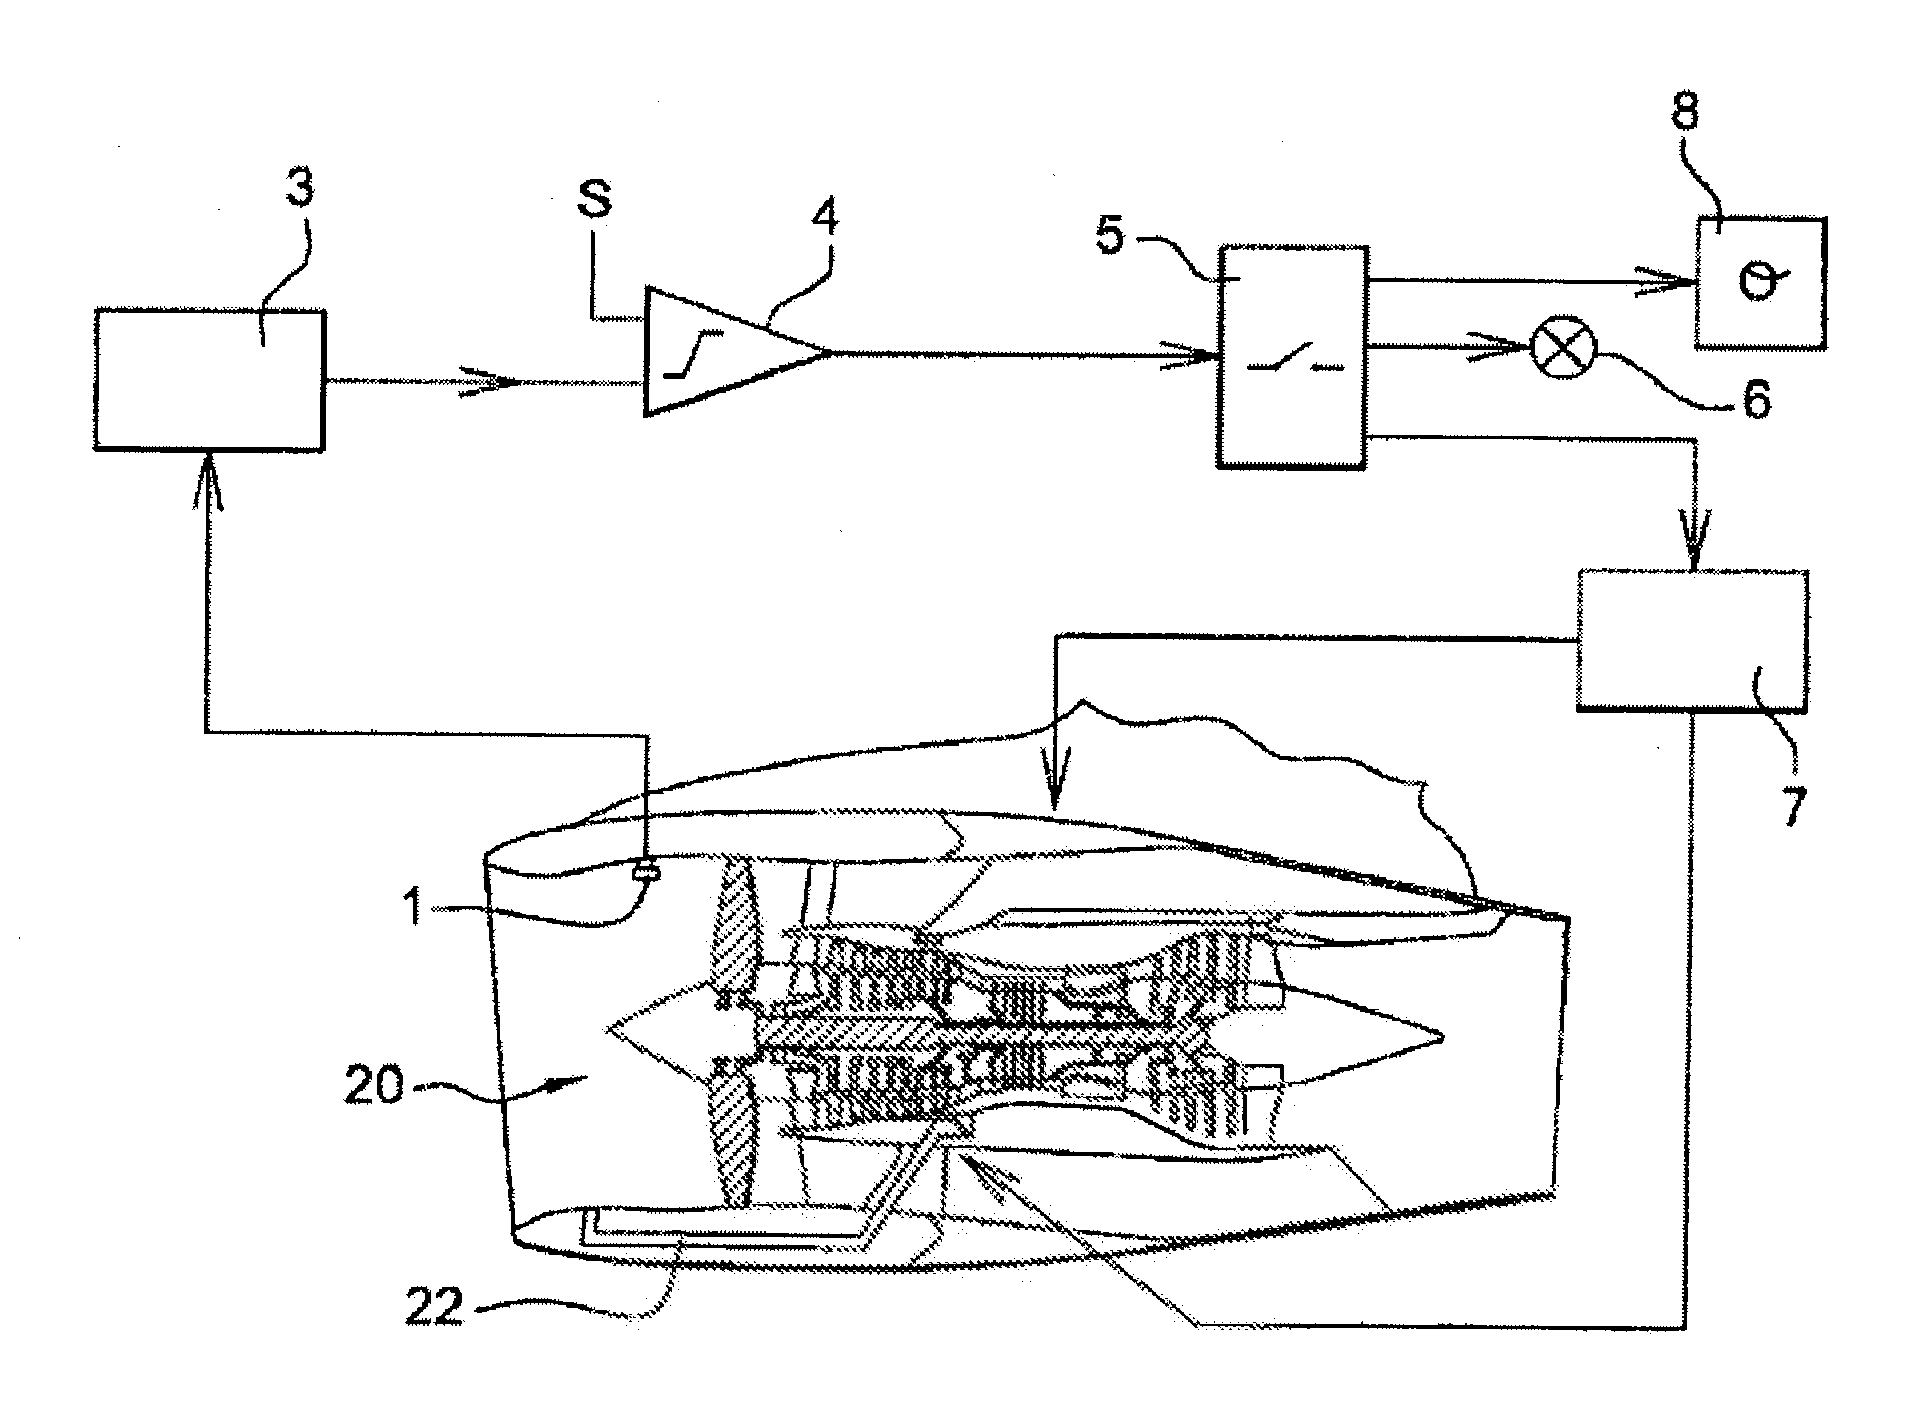 Device for protection against icing for aircraft engines and related de-icing method